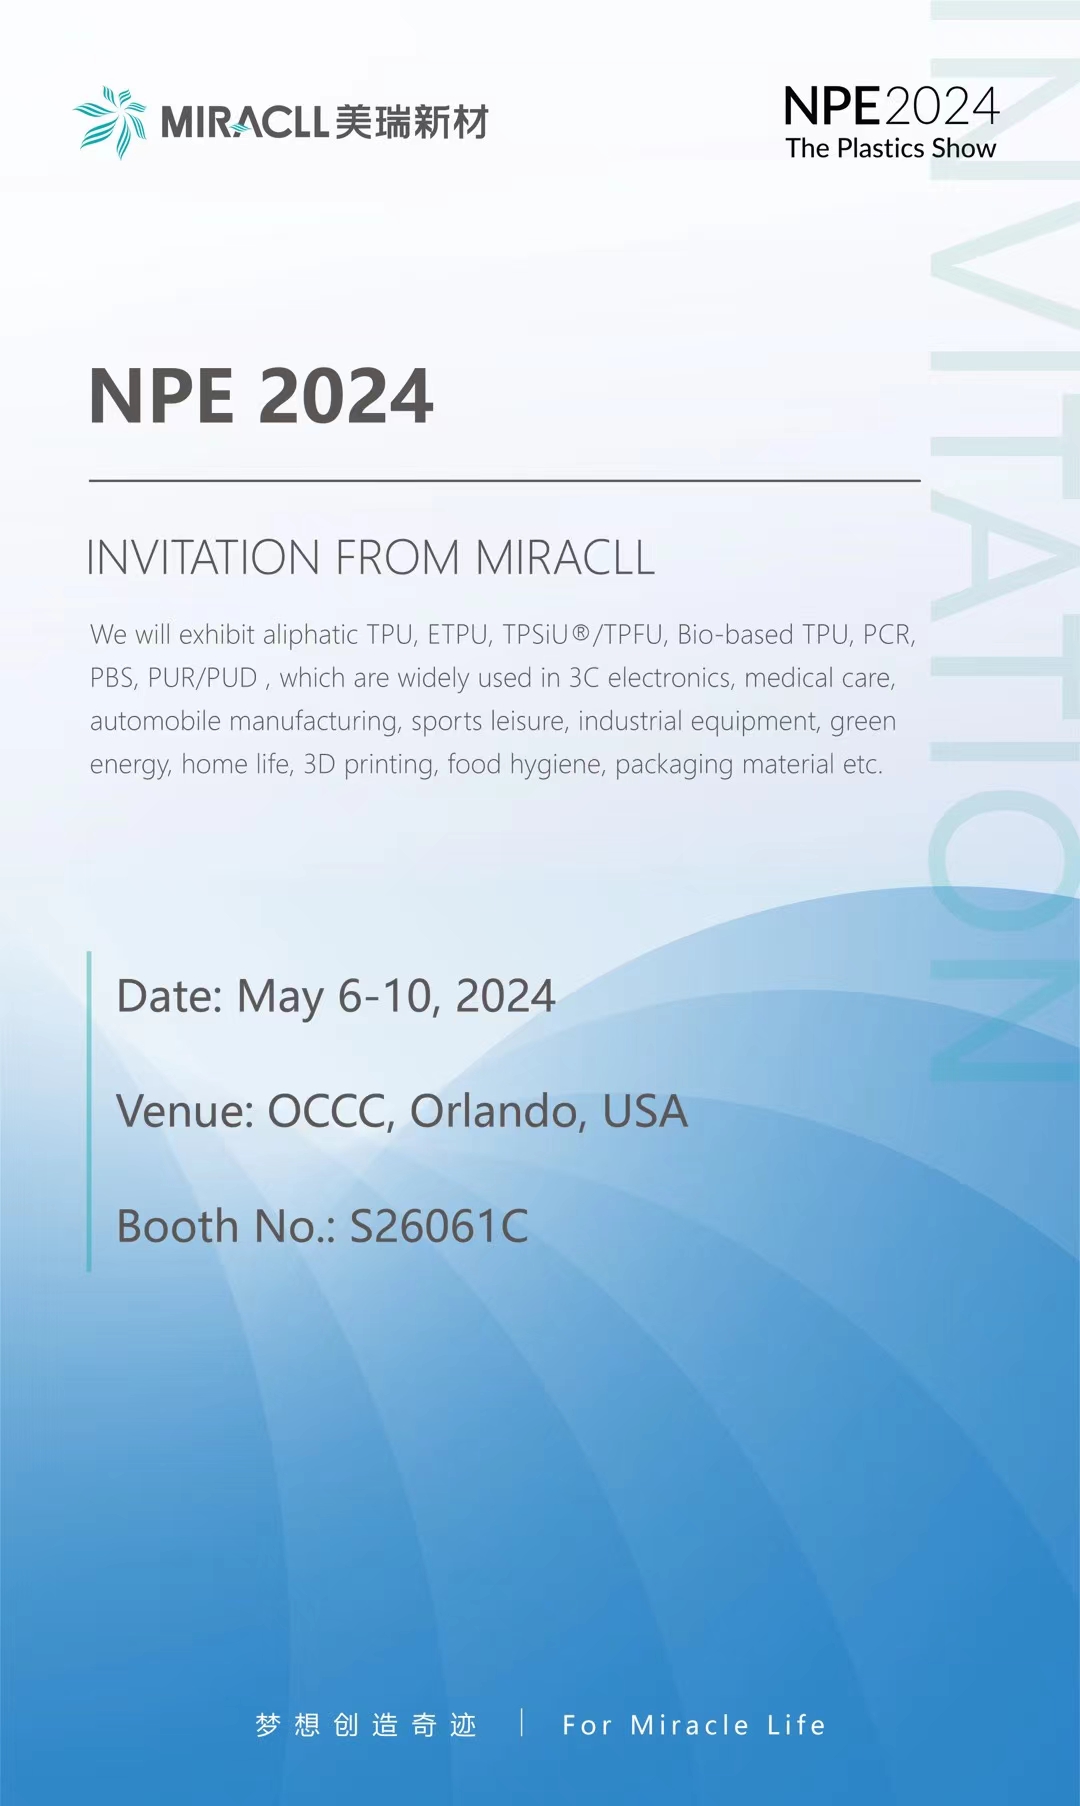 Miracll Chemicals invites you to participate in NPE 2024